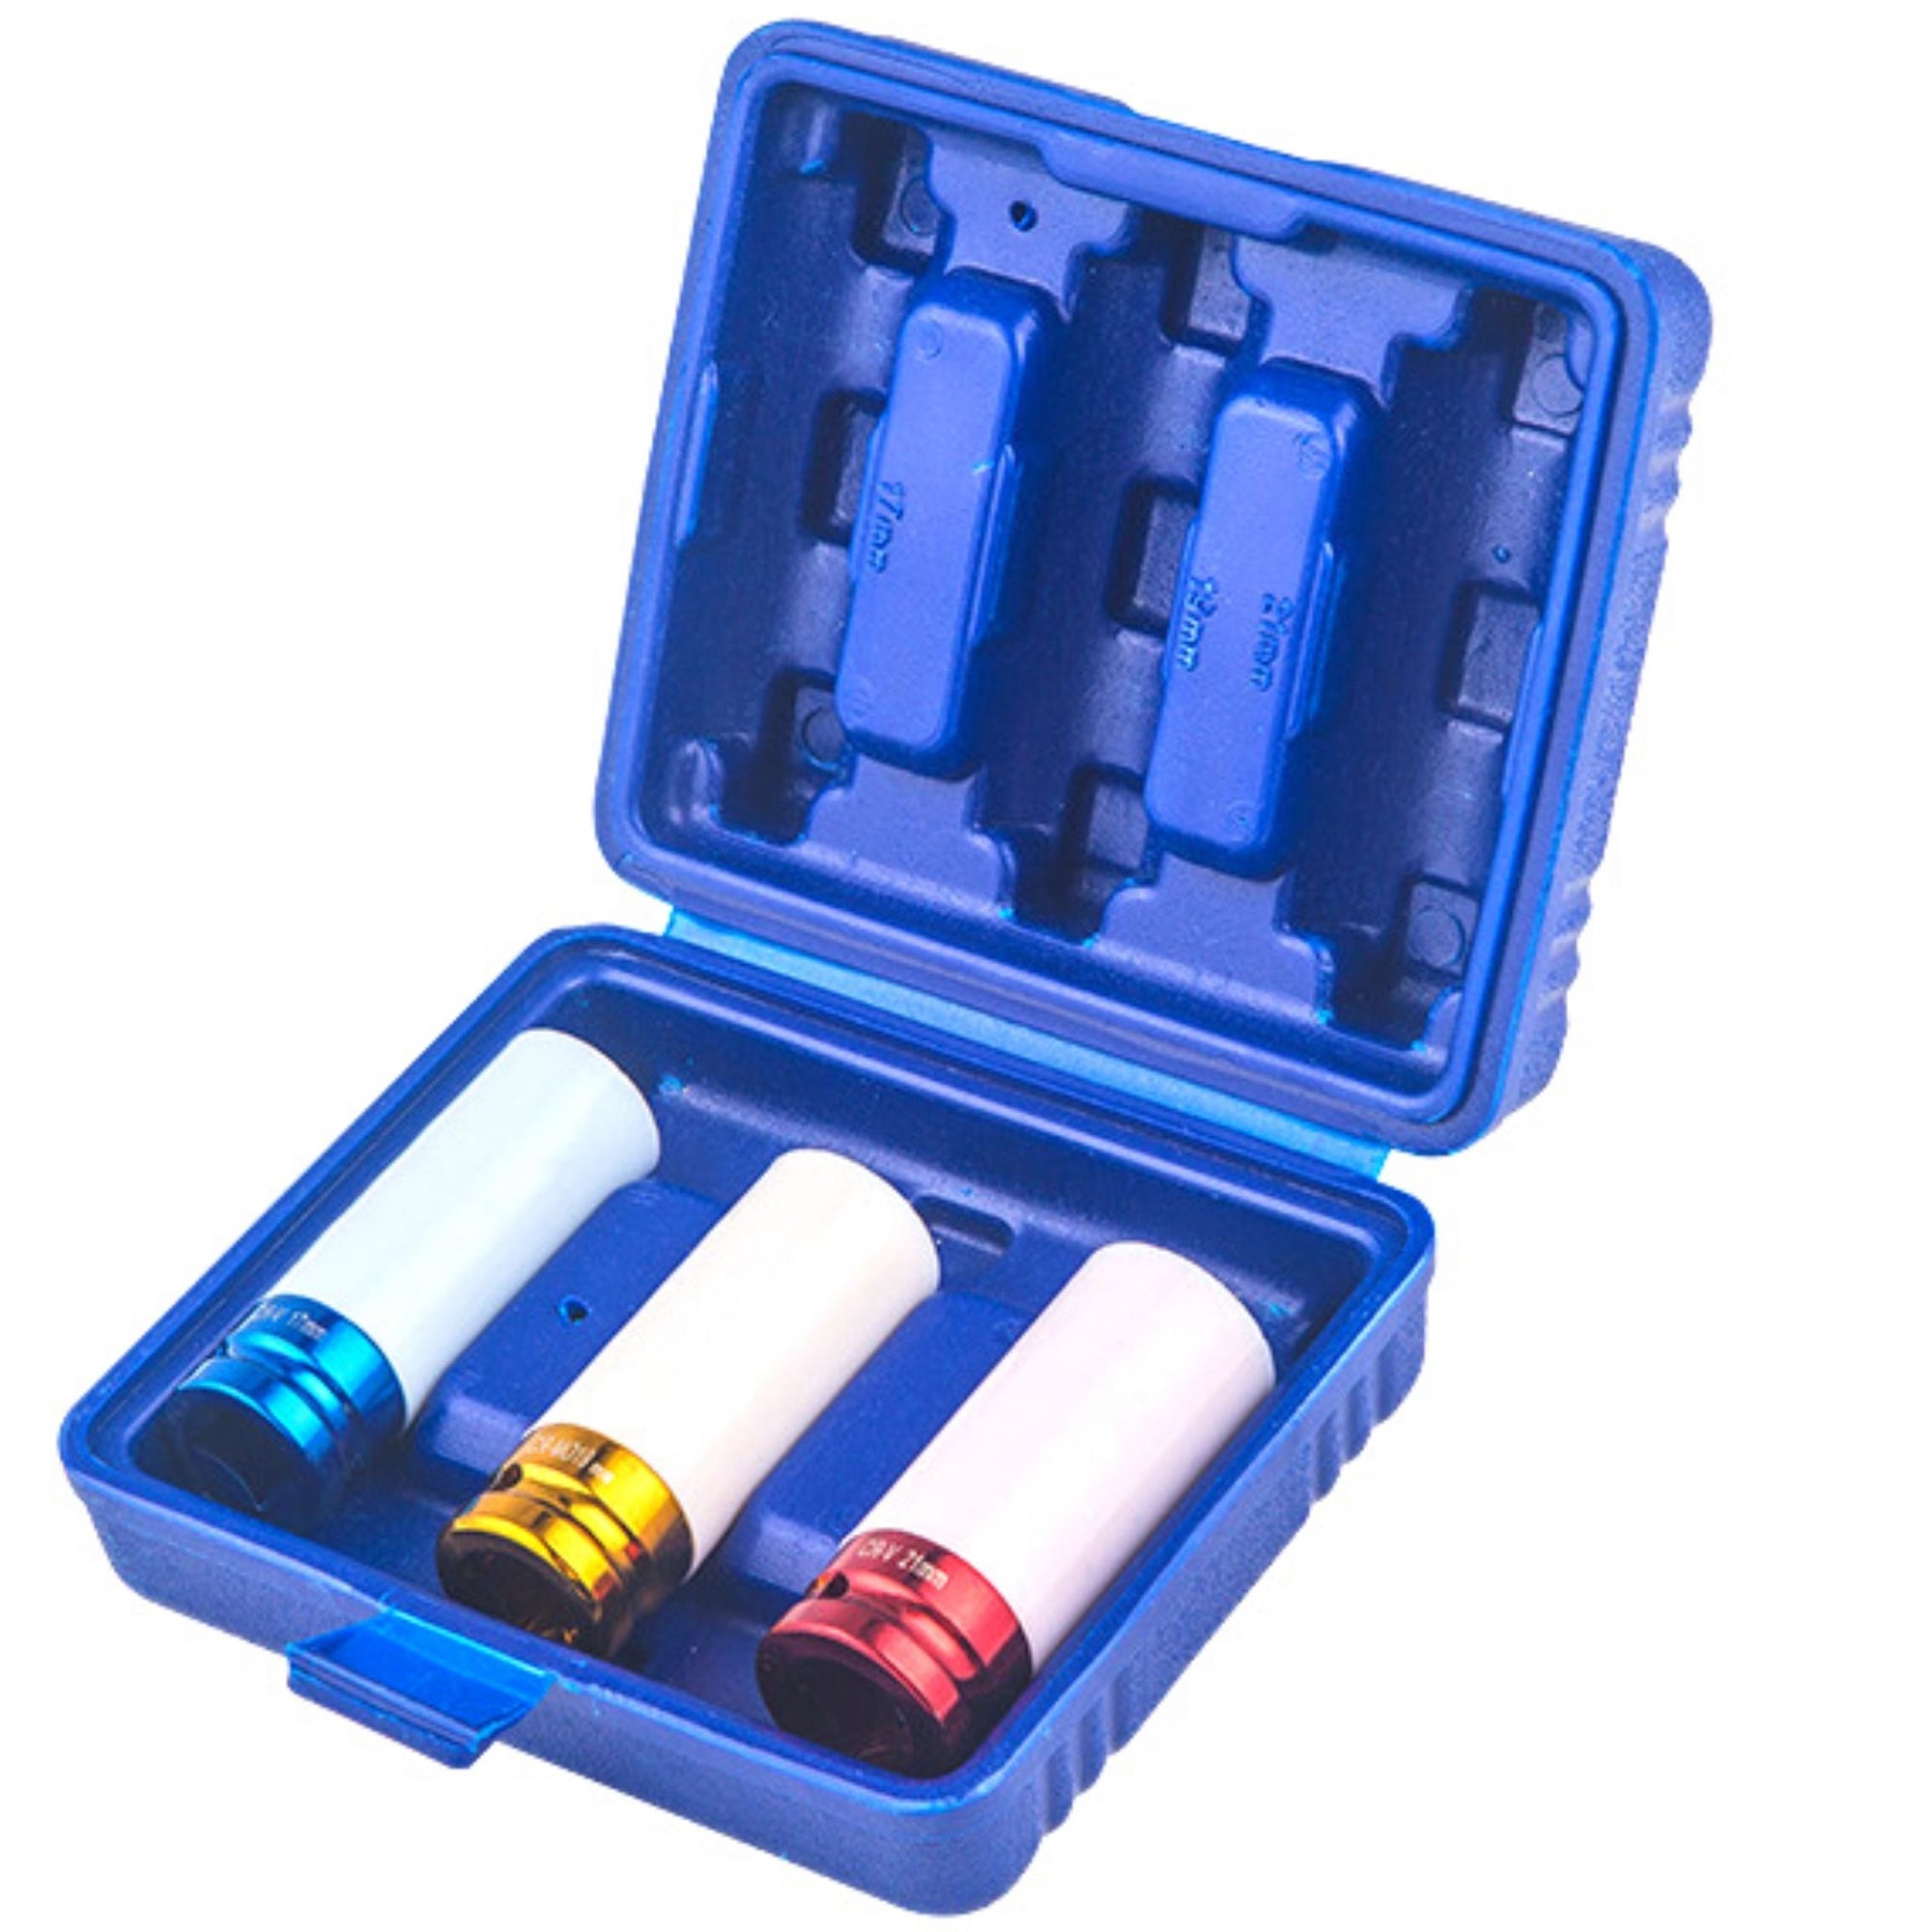 3 Piece - Wheel Nut Socket Set (17mm, 19mm, 21mm) - South East Clearance Centre